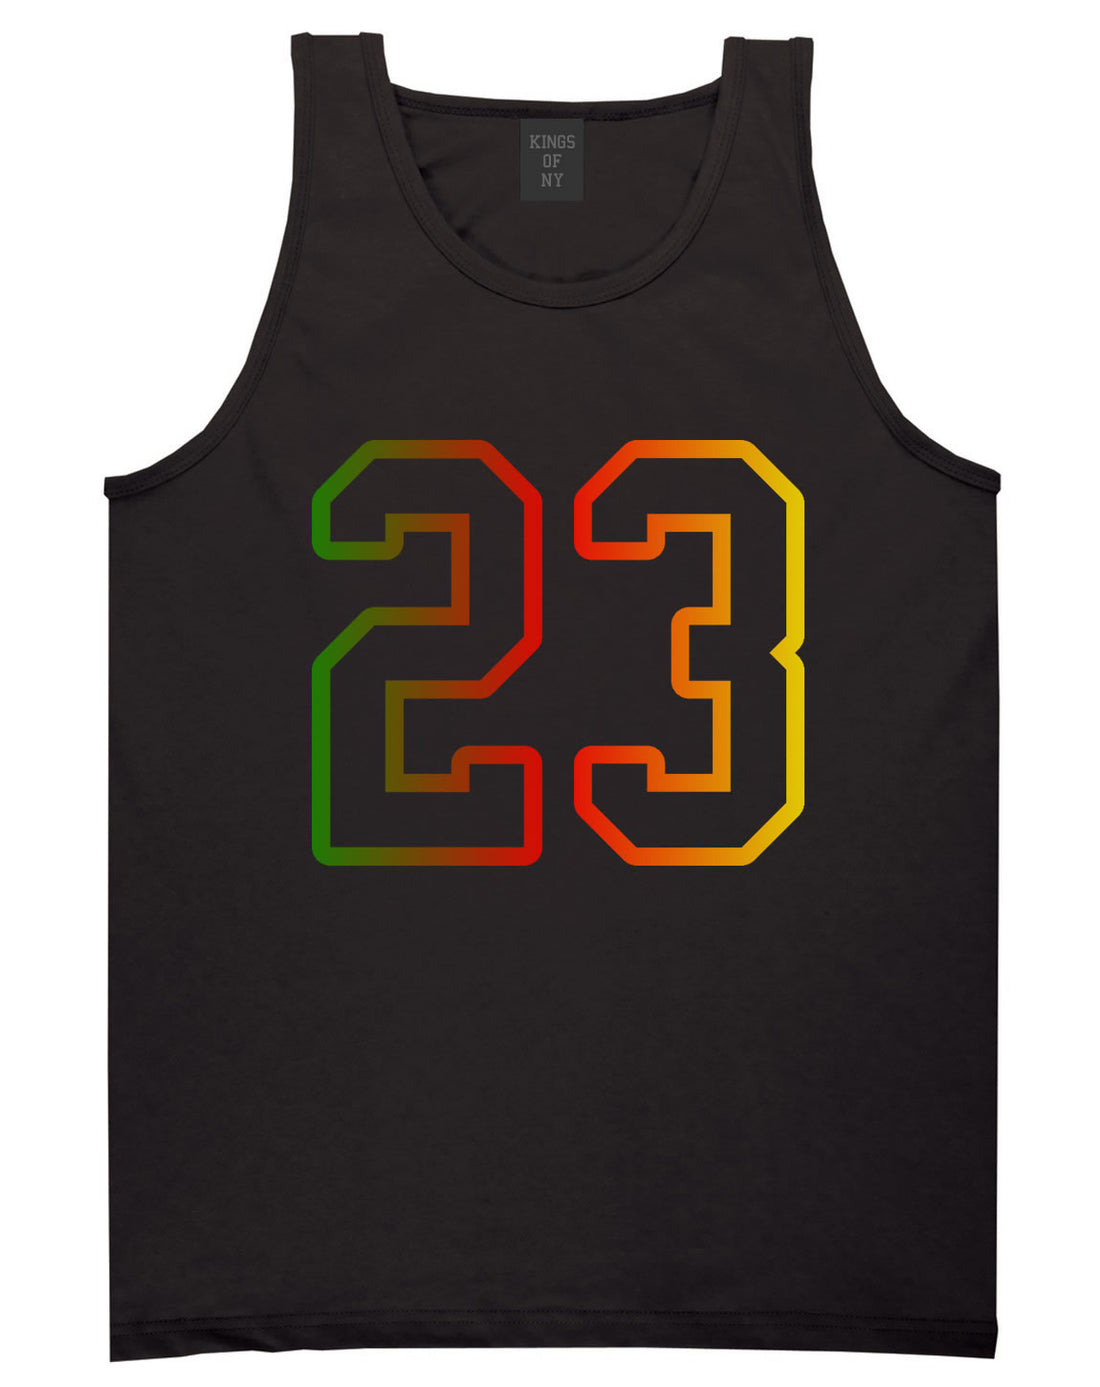 23 Cement Print Colorful Jersey Tank Top in Black By Kings Of NY